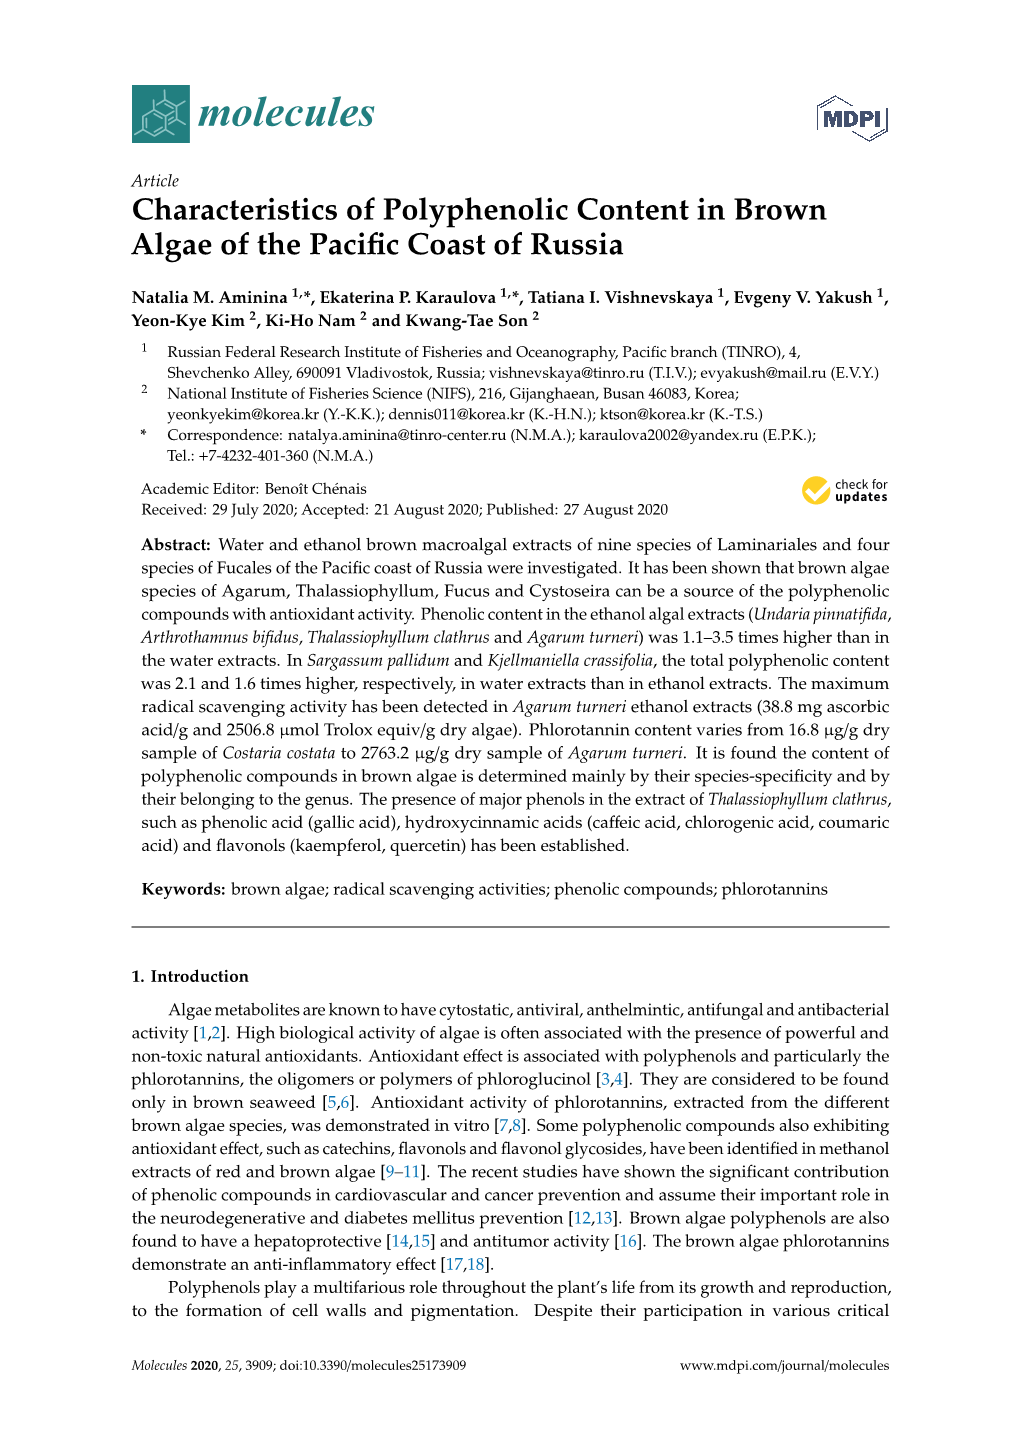 Characteristics of Polyphenolic Content in Brown Algae of the Paciﬁc Coast of Russia